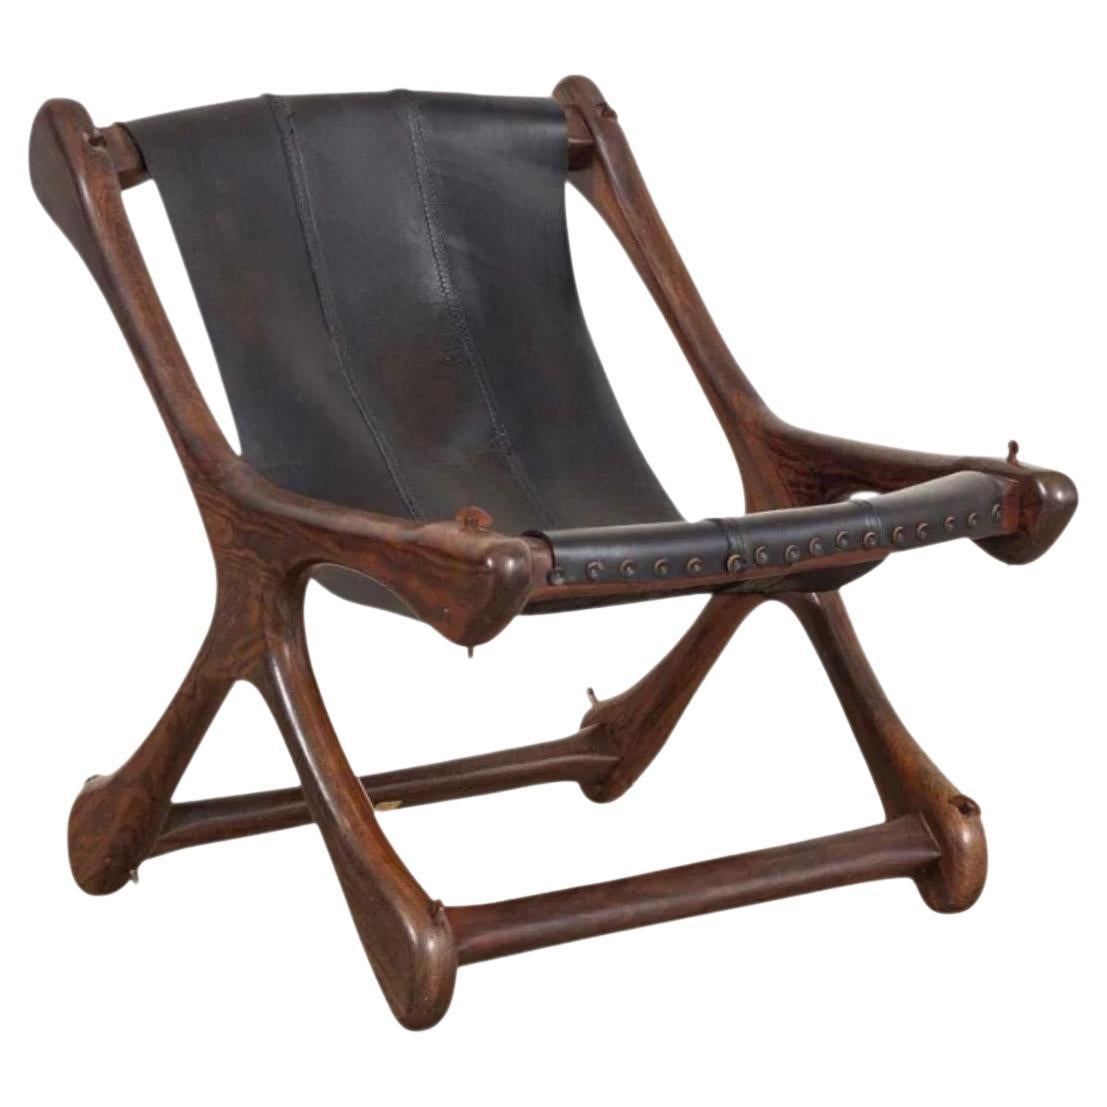 Midcentury Lounge Chair in Rosewood & Leather by Don Shoemaker, 1960s